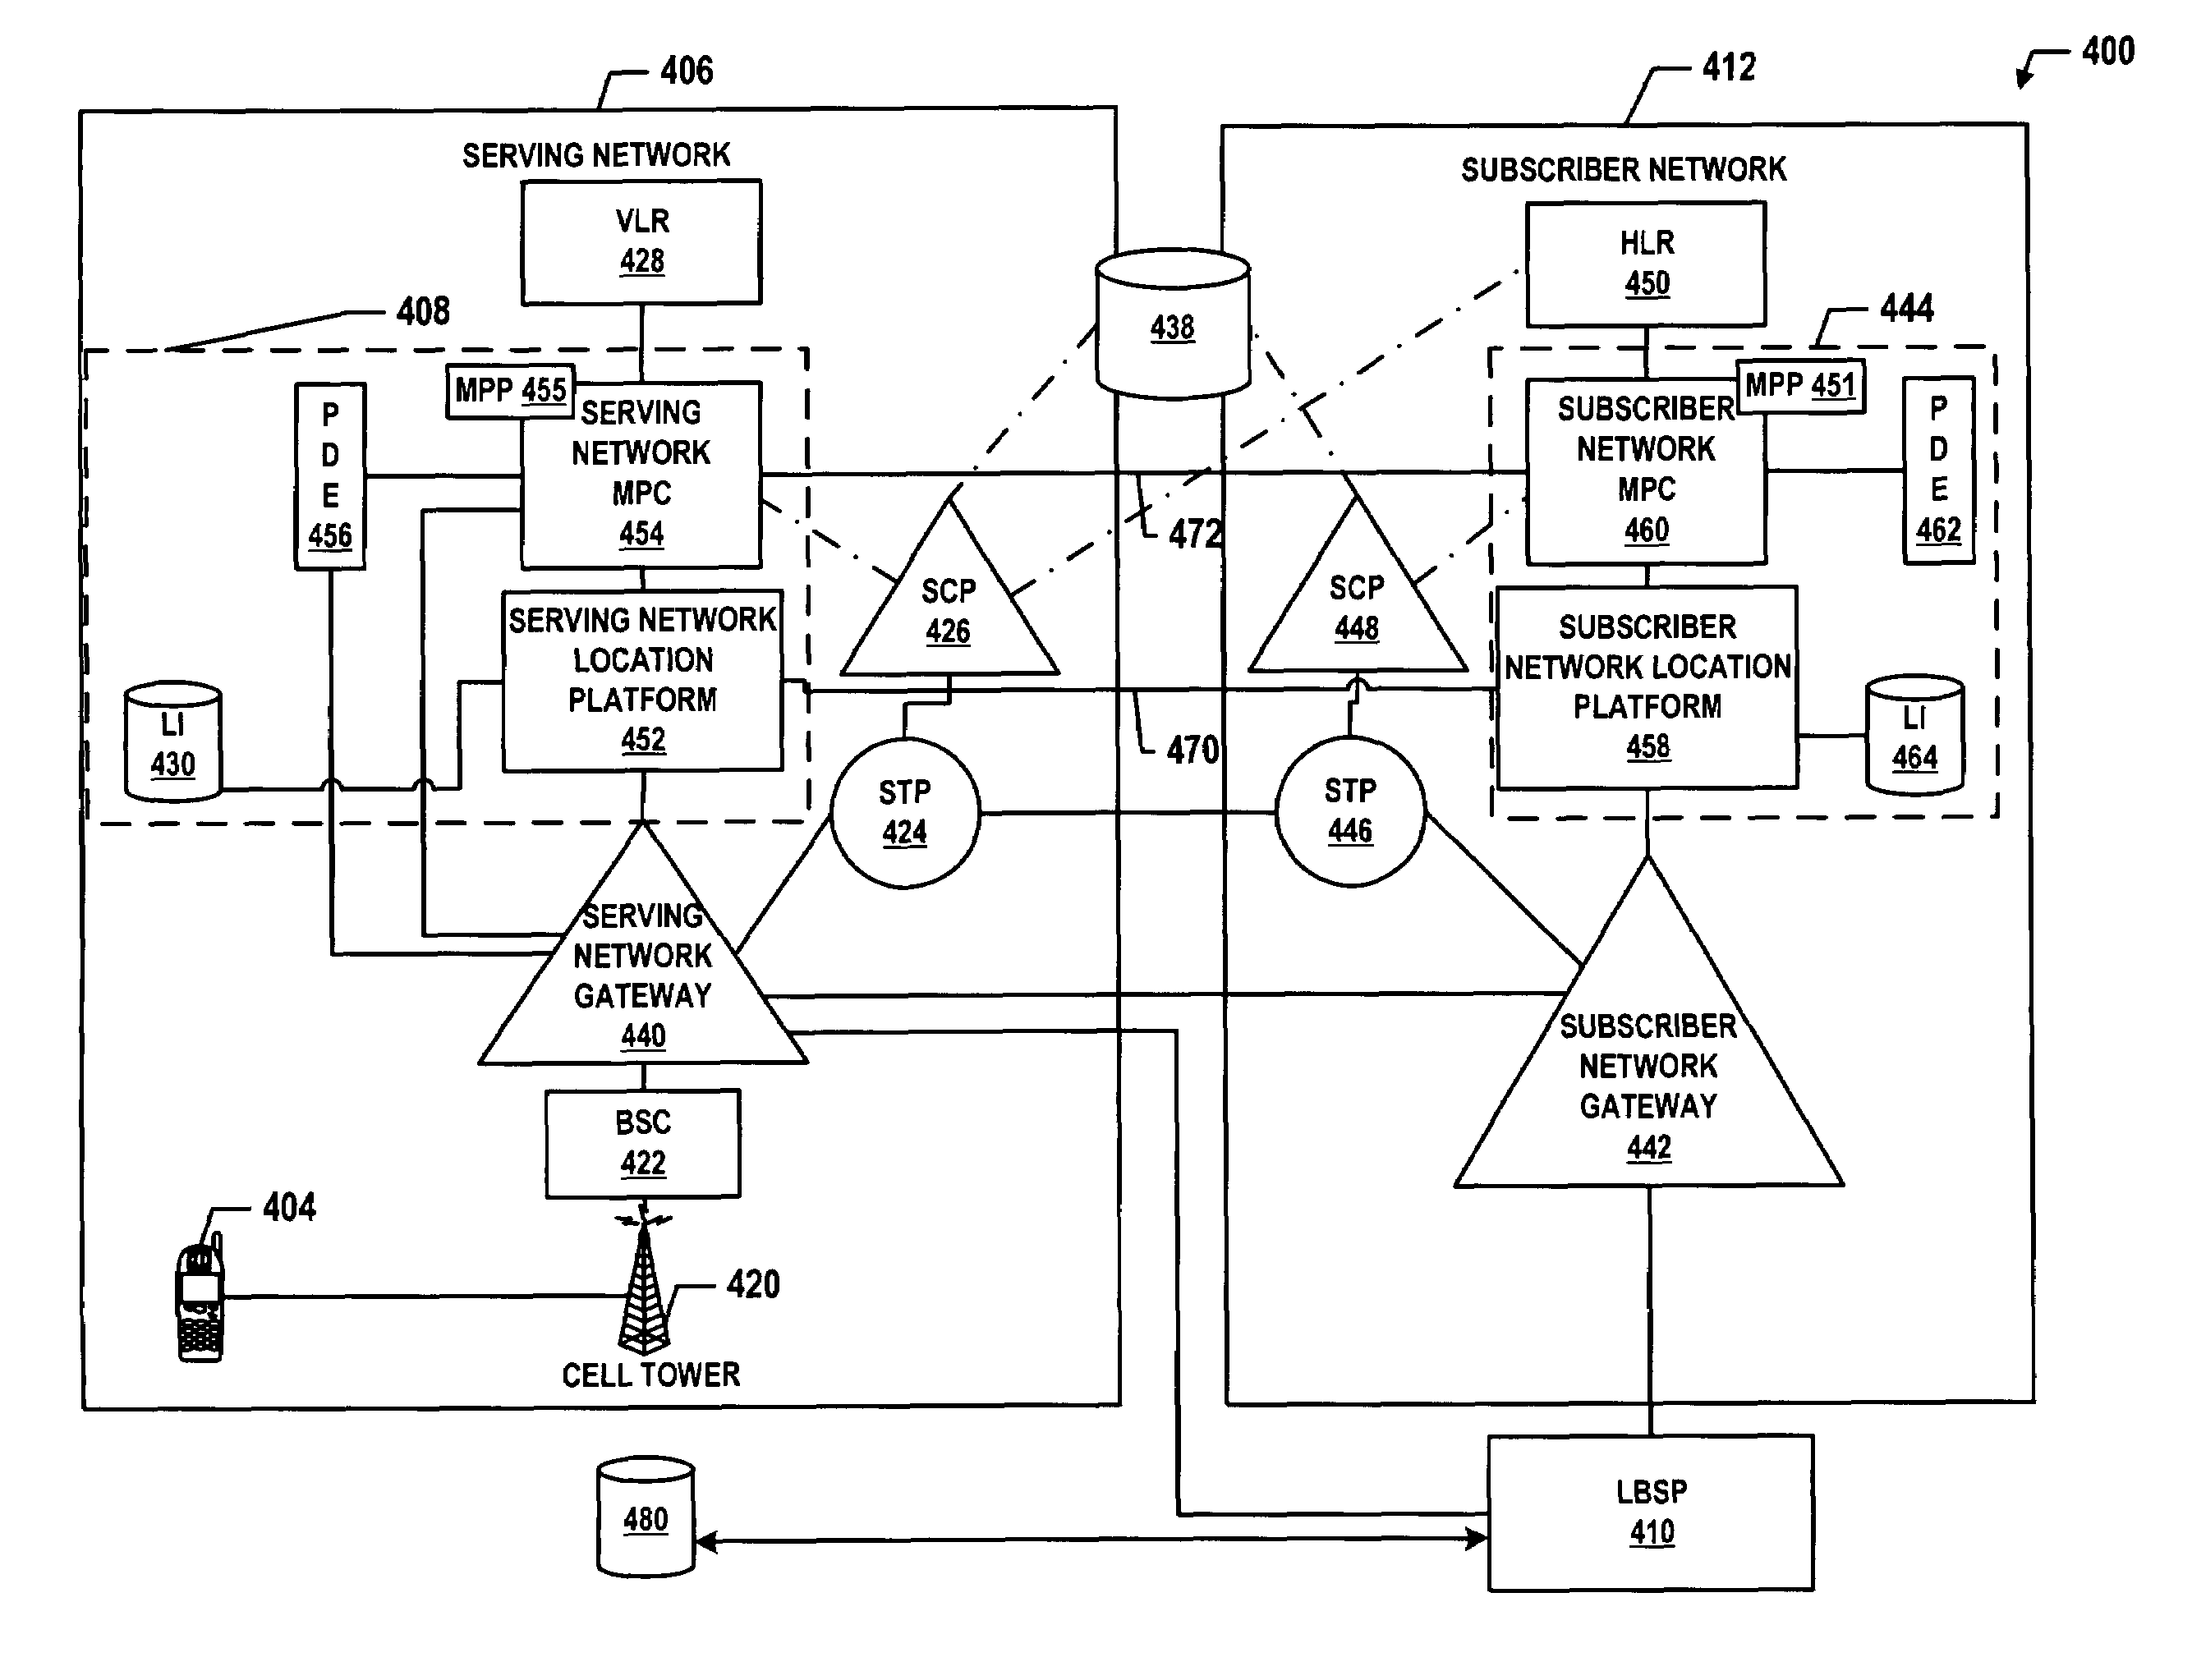 Method and system for sharing and/or centralizing mobile positioning information and geospatial data for roaming mobile subscriber terminals